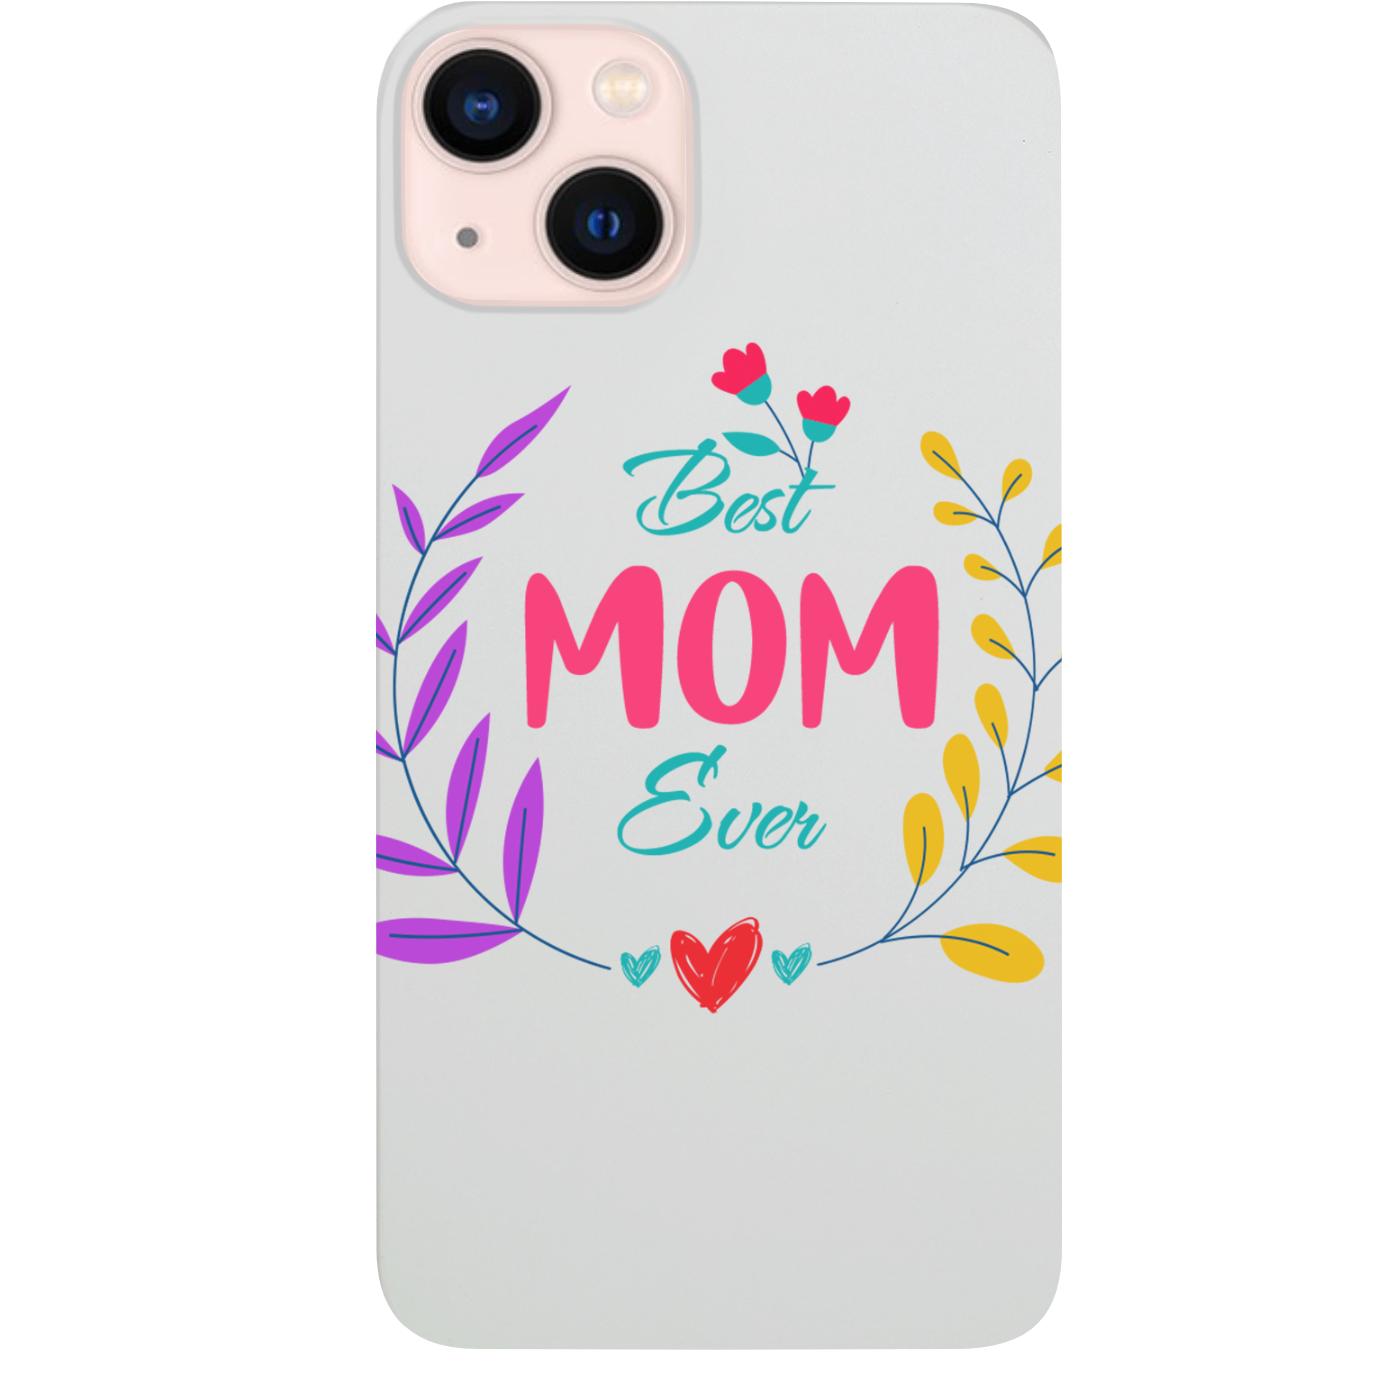 Best Mom Ever - UV Color Printed Phone Case